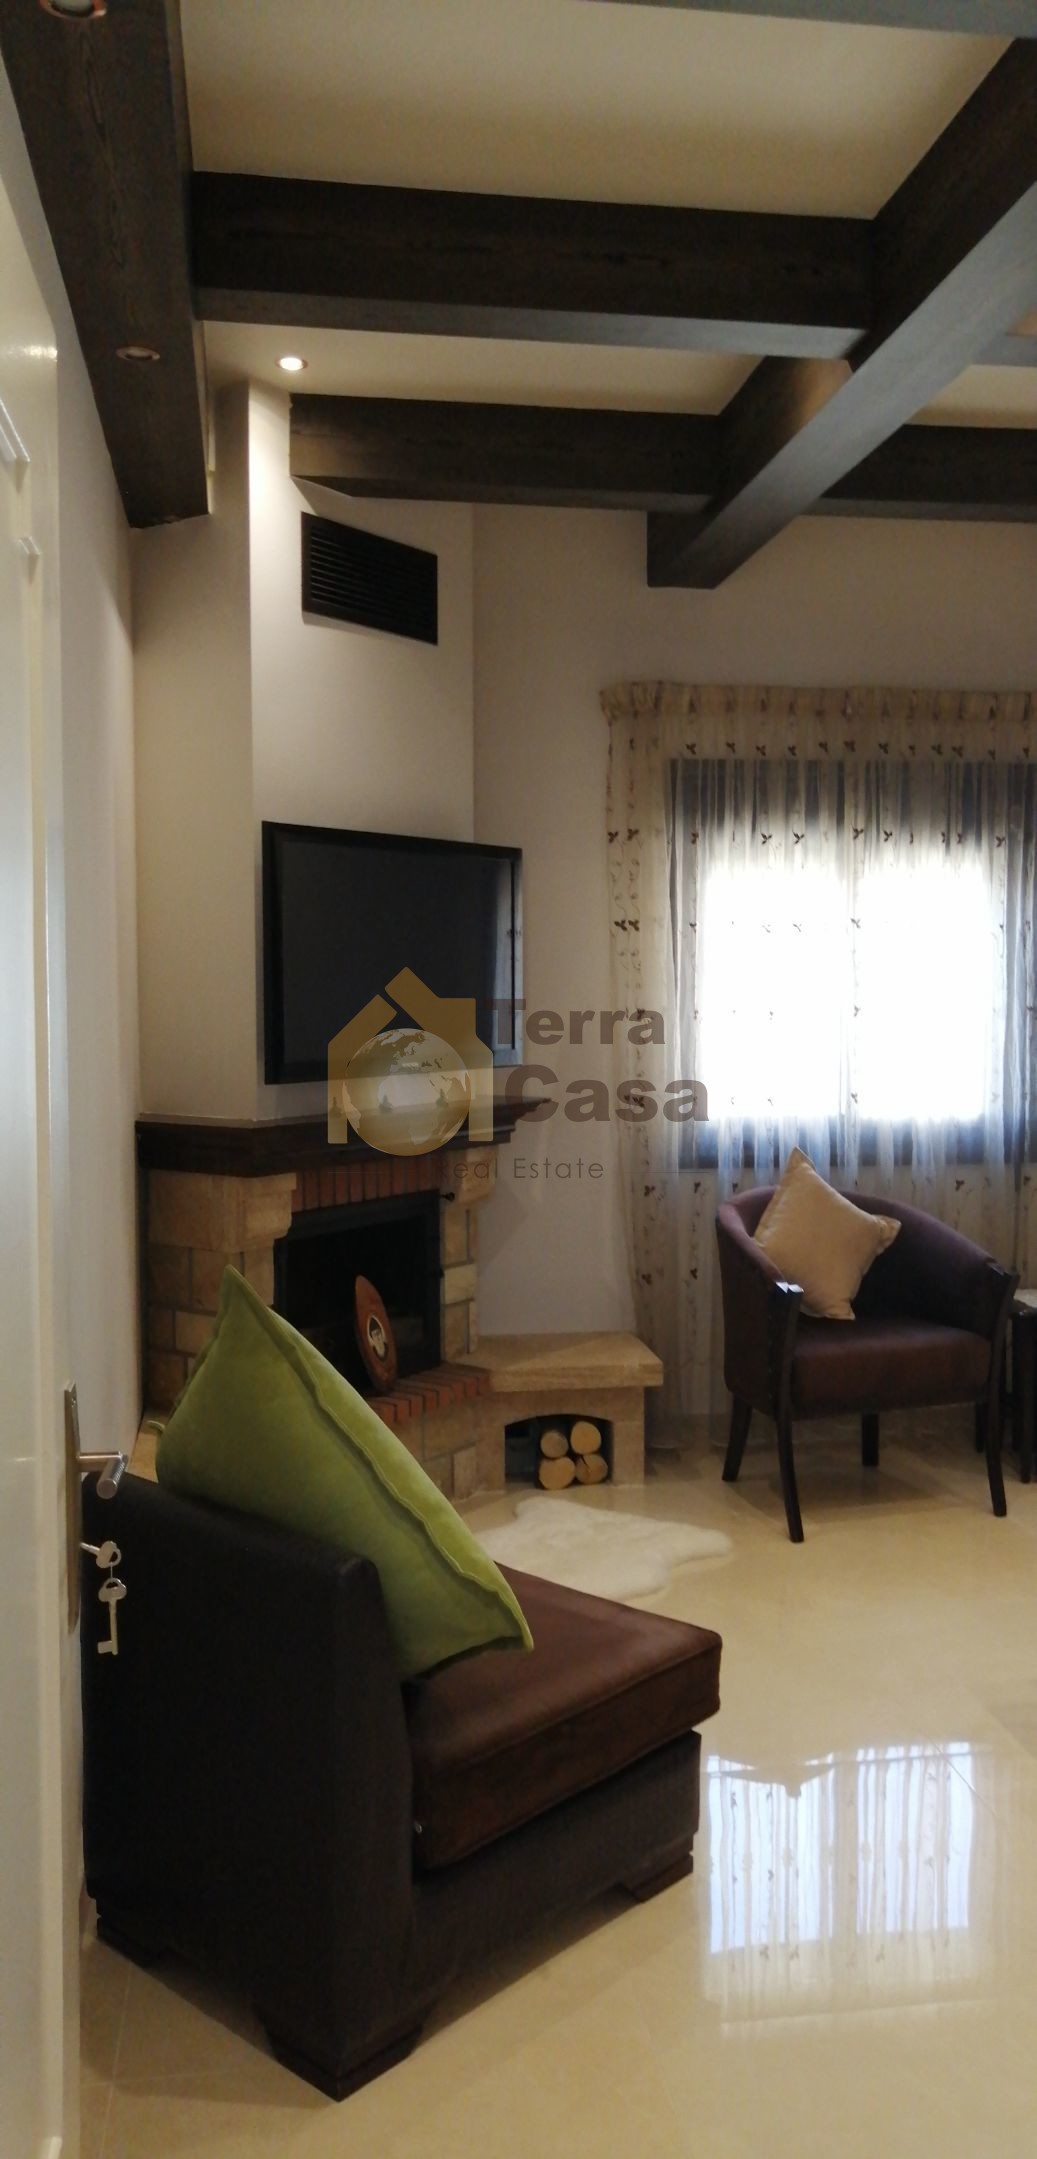 Fully decorated apartment for sale Ref# 1993